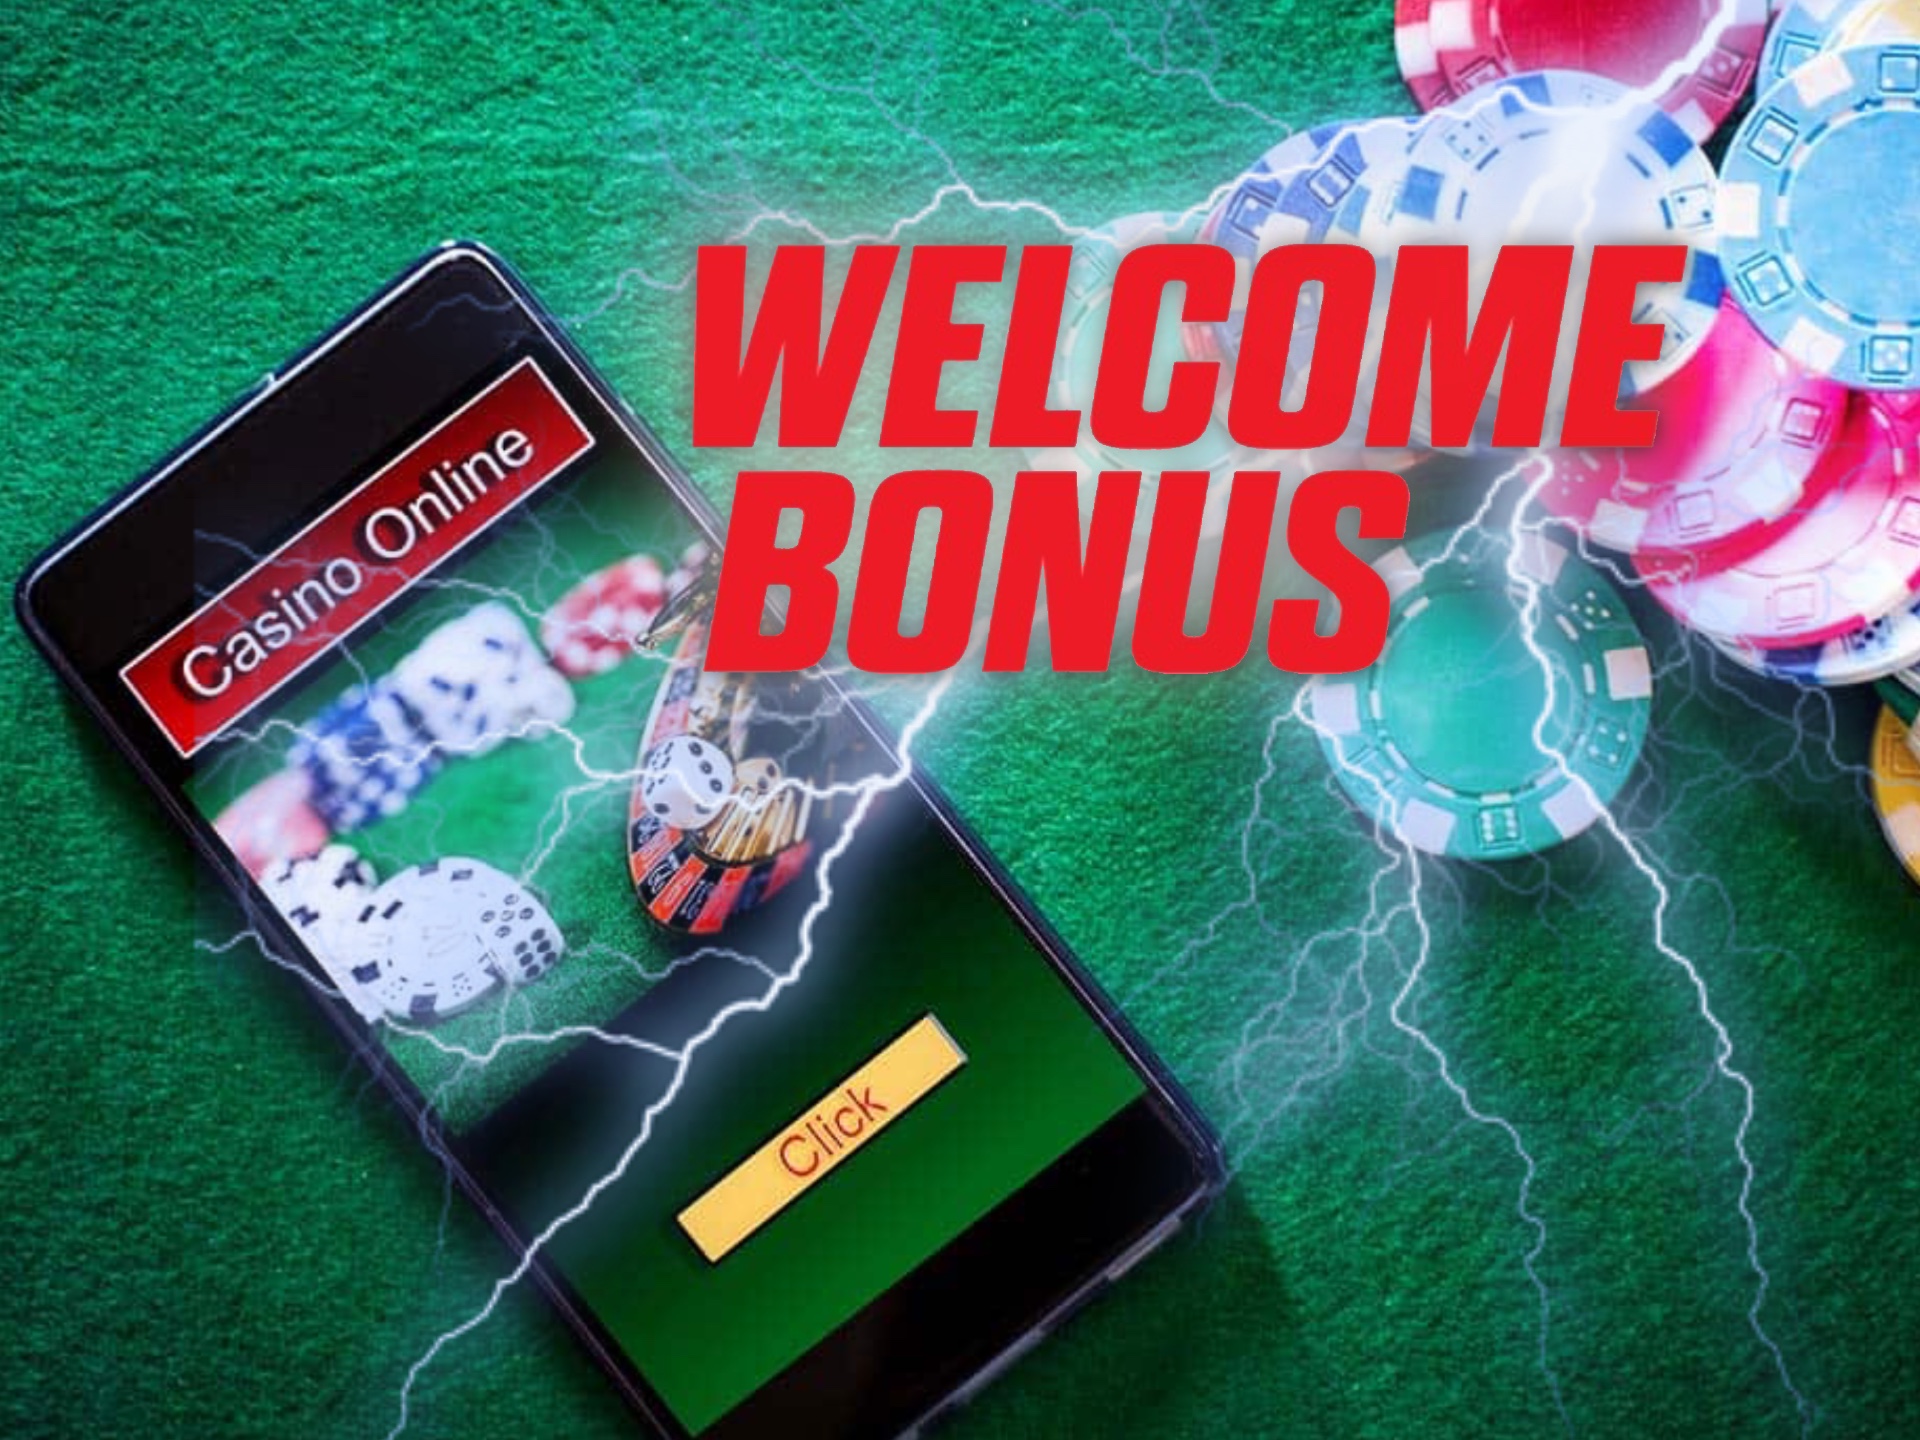 Consider all the bonuses and offers before choosing an online casino.